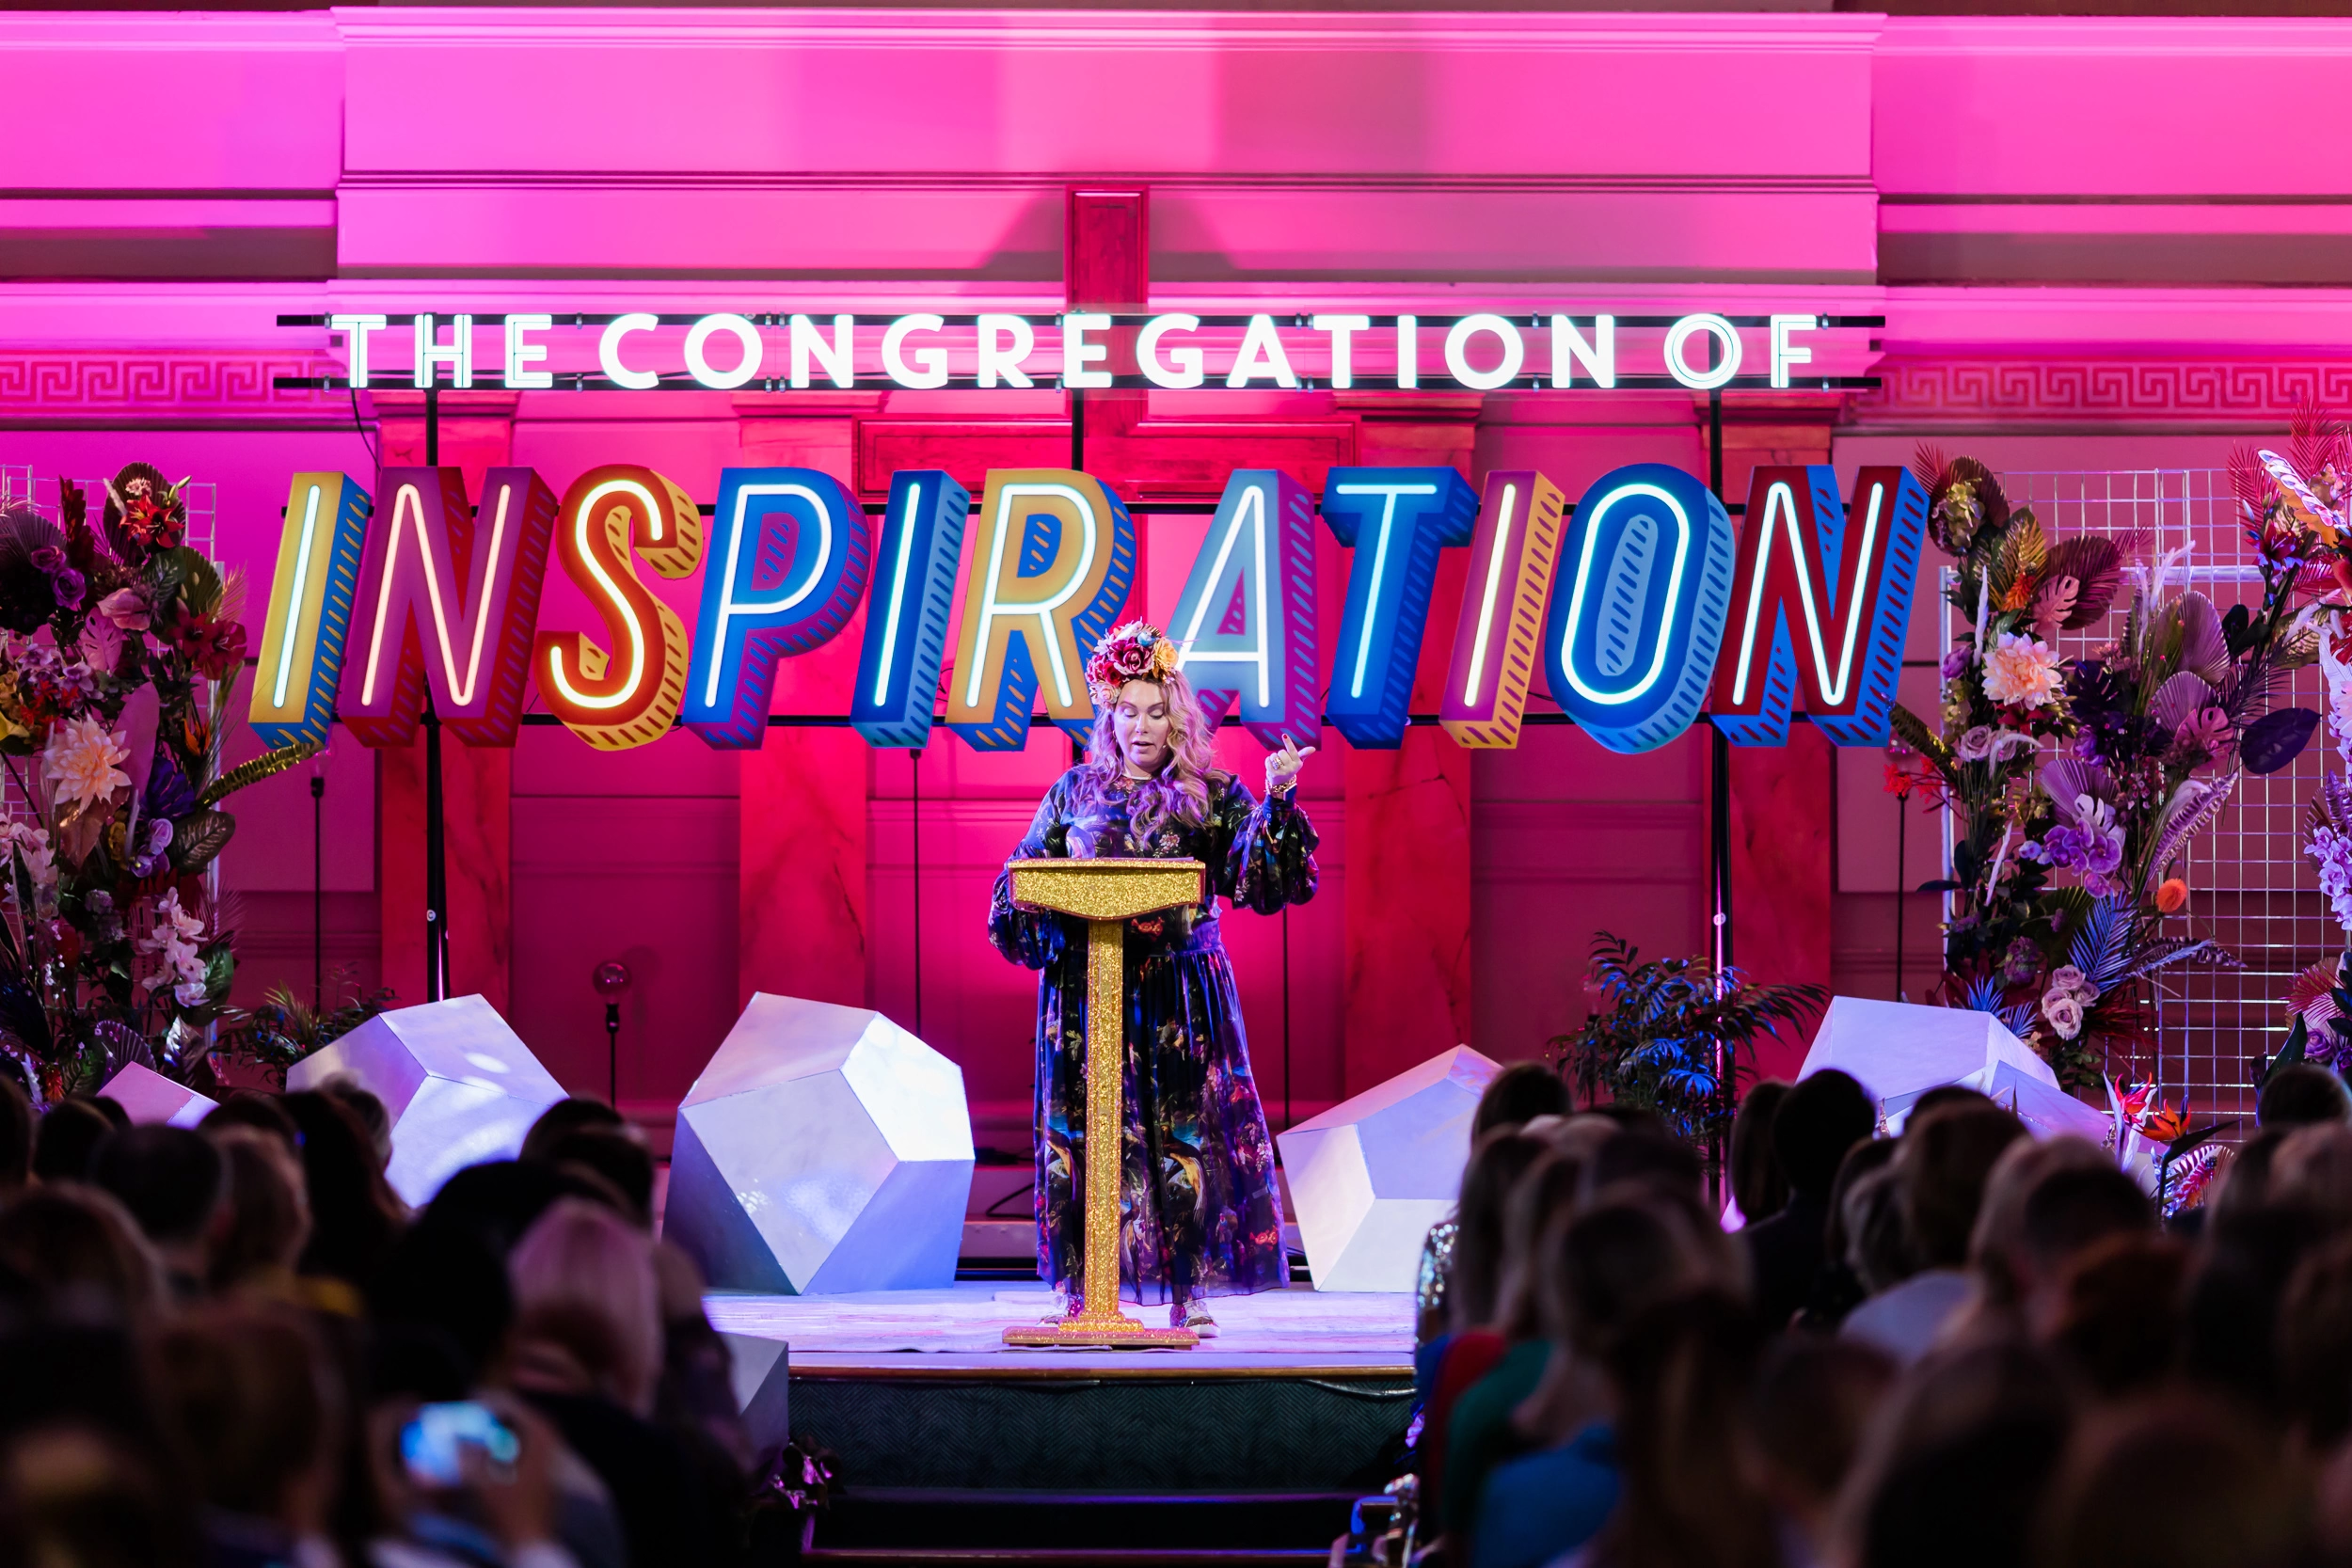 Holly Tucker MBE standing on stage at her event, Congregation of Inspiration.